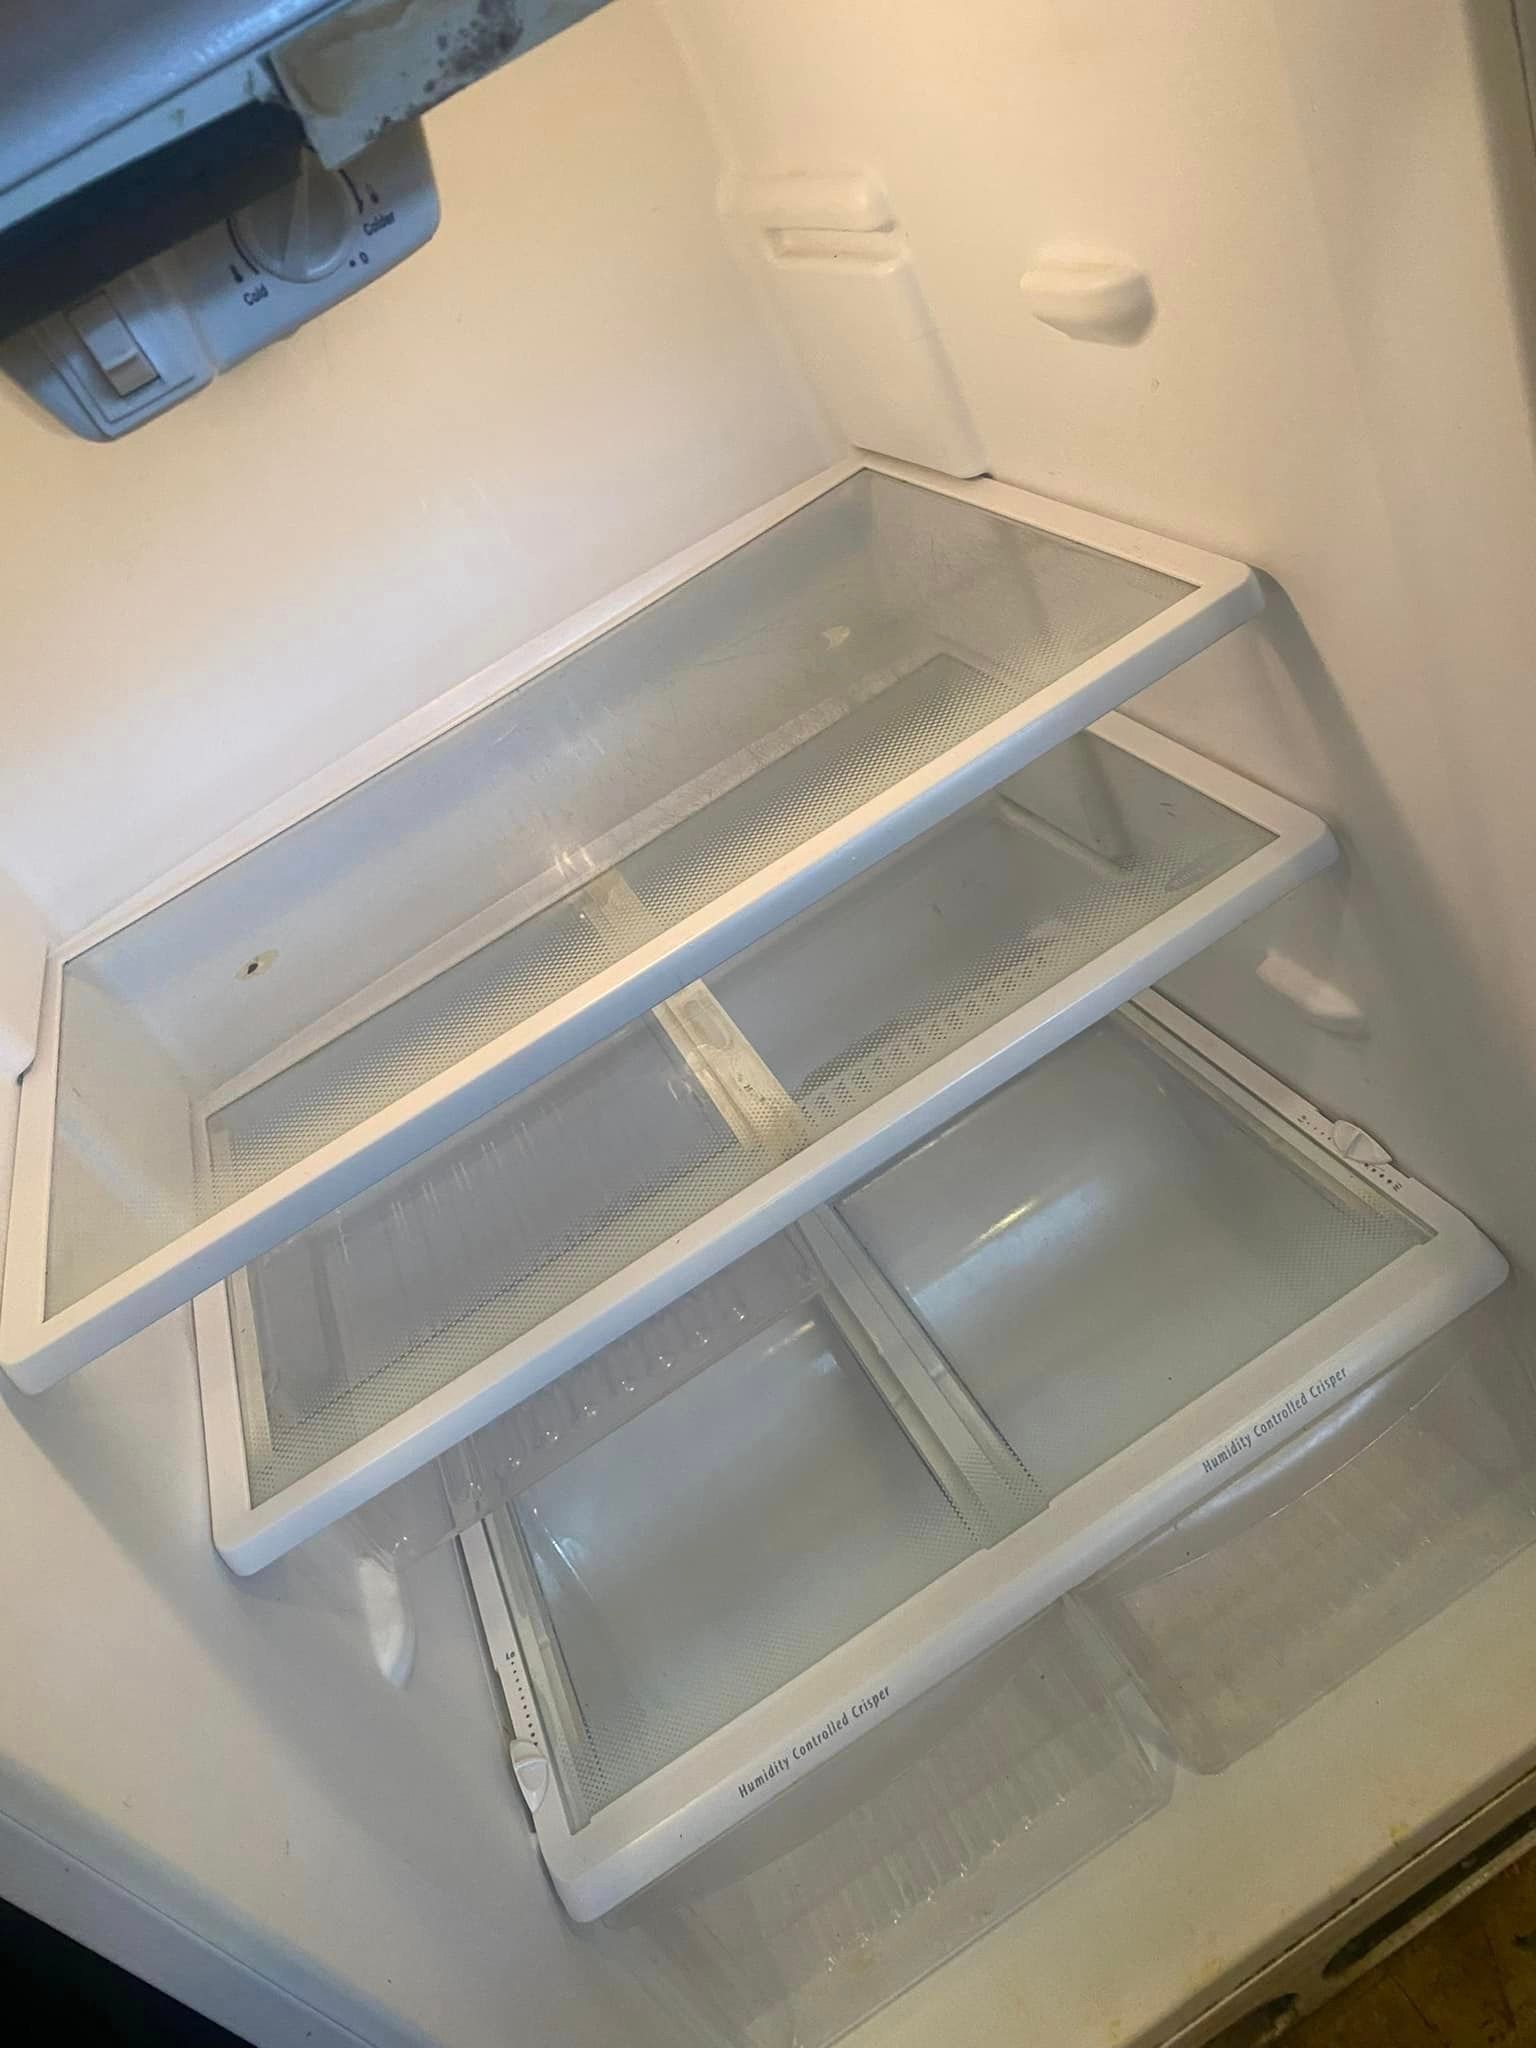 After is an image of the inside of an empty refrigerator with a lot of shelves that is so clean and glimmer